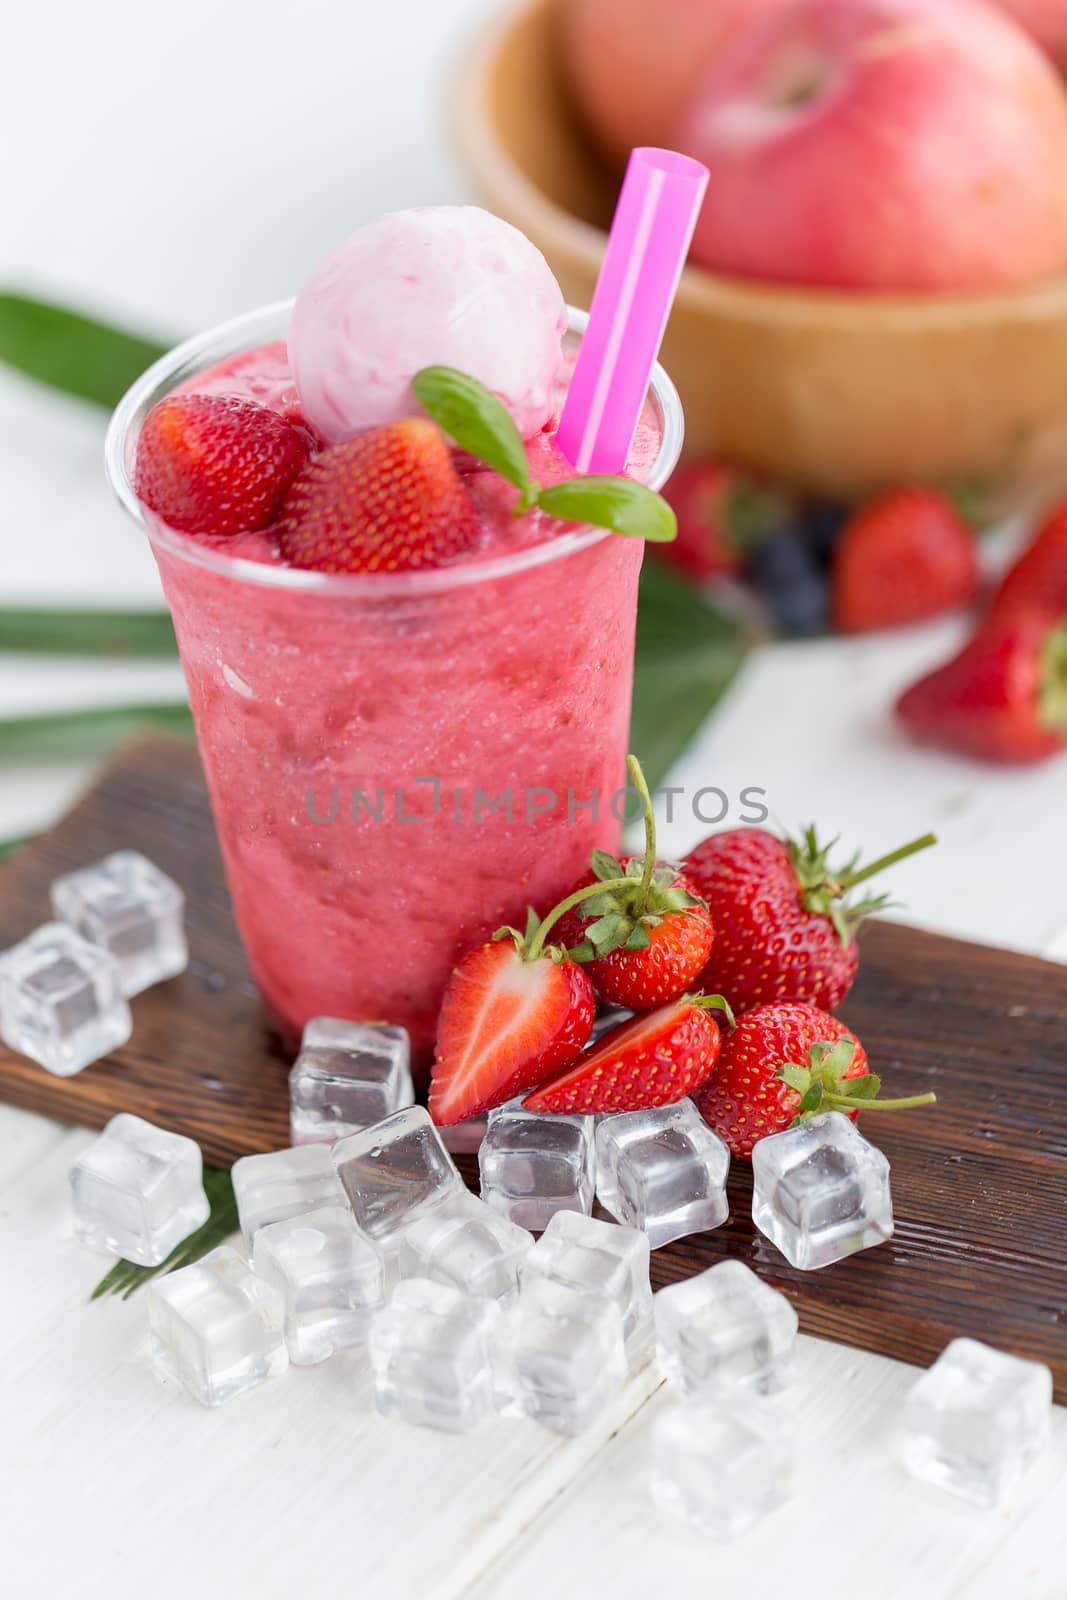 Strawberry smoothie and yogurt ice cream Strawberry on a wooden plate with ice cubes and fruit as background.